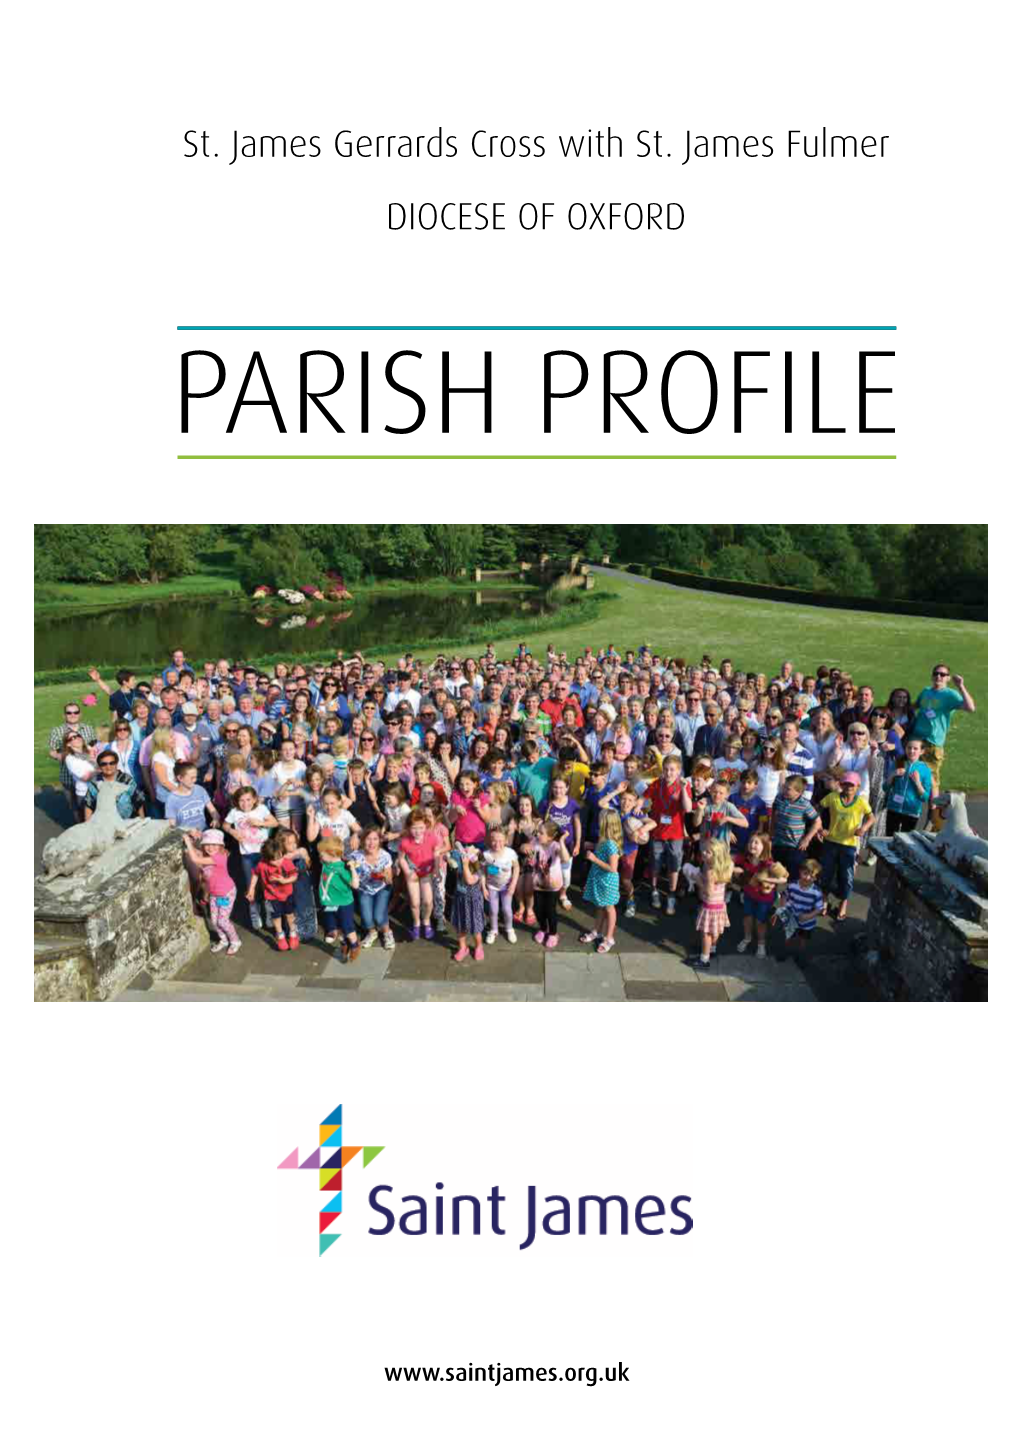 St. James Gerrards Cross with St. James Fulmer DIOCESE of OXFORD PARISH PROFILE